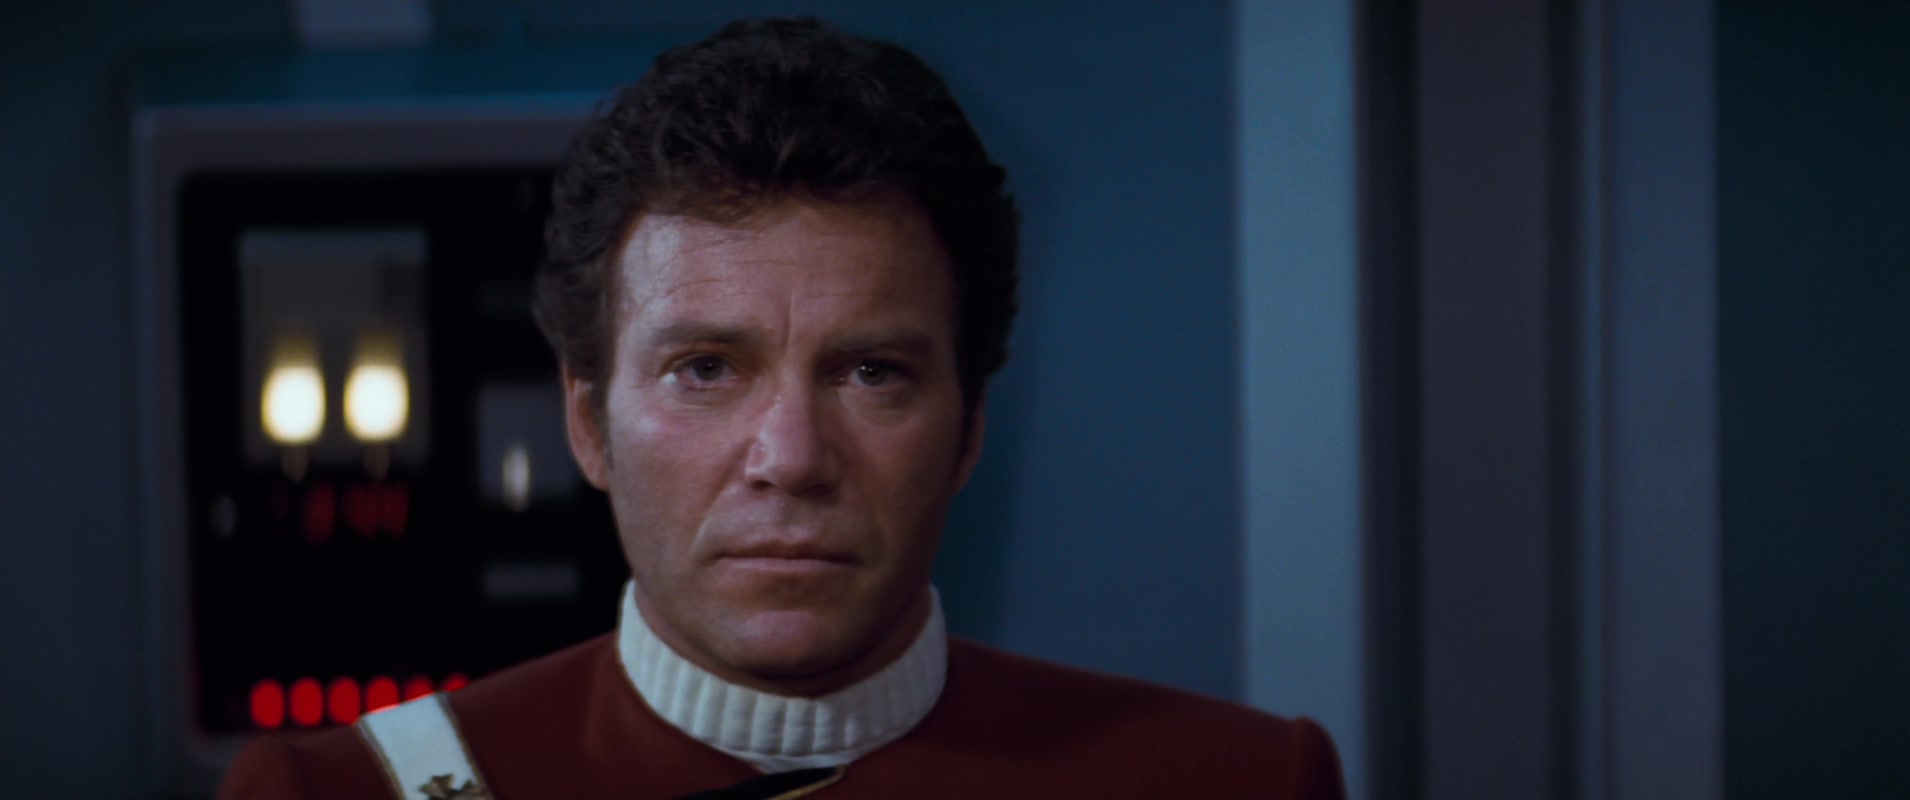 Captain Kirk (William Shatner) steadies himself to deal with the threat of Khan (Ricardo Montalbán) in Star Trek II: The Wrath of Khan (1982), Paramount Pictures via Blu-ray